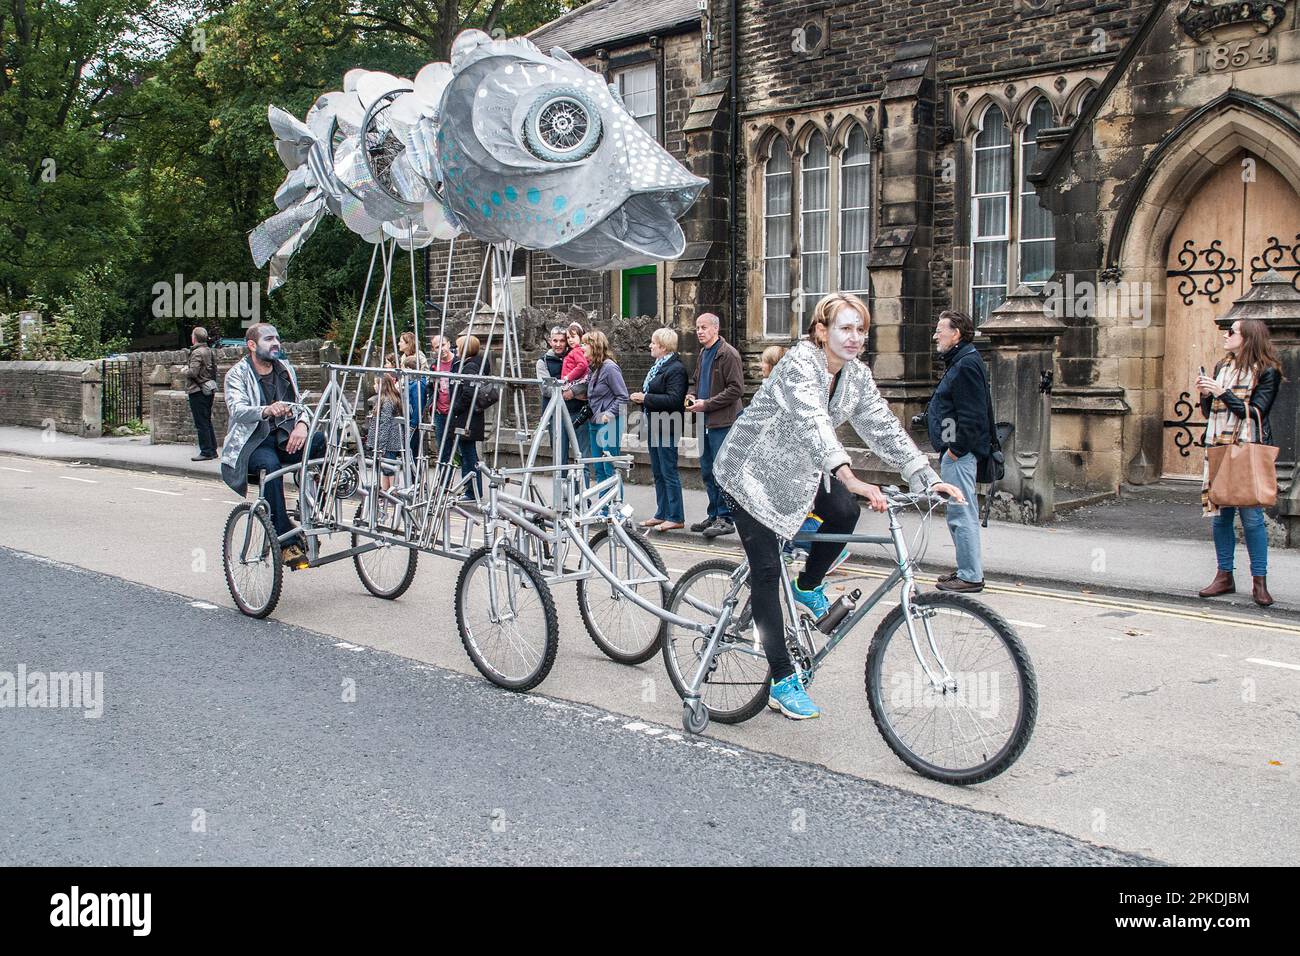 Giant fish is hauled by a cyclist in the street parade at the Skipton International Puppet Festival 2015 Stock Photo